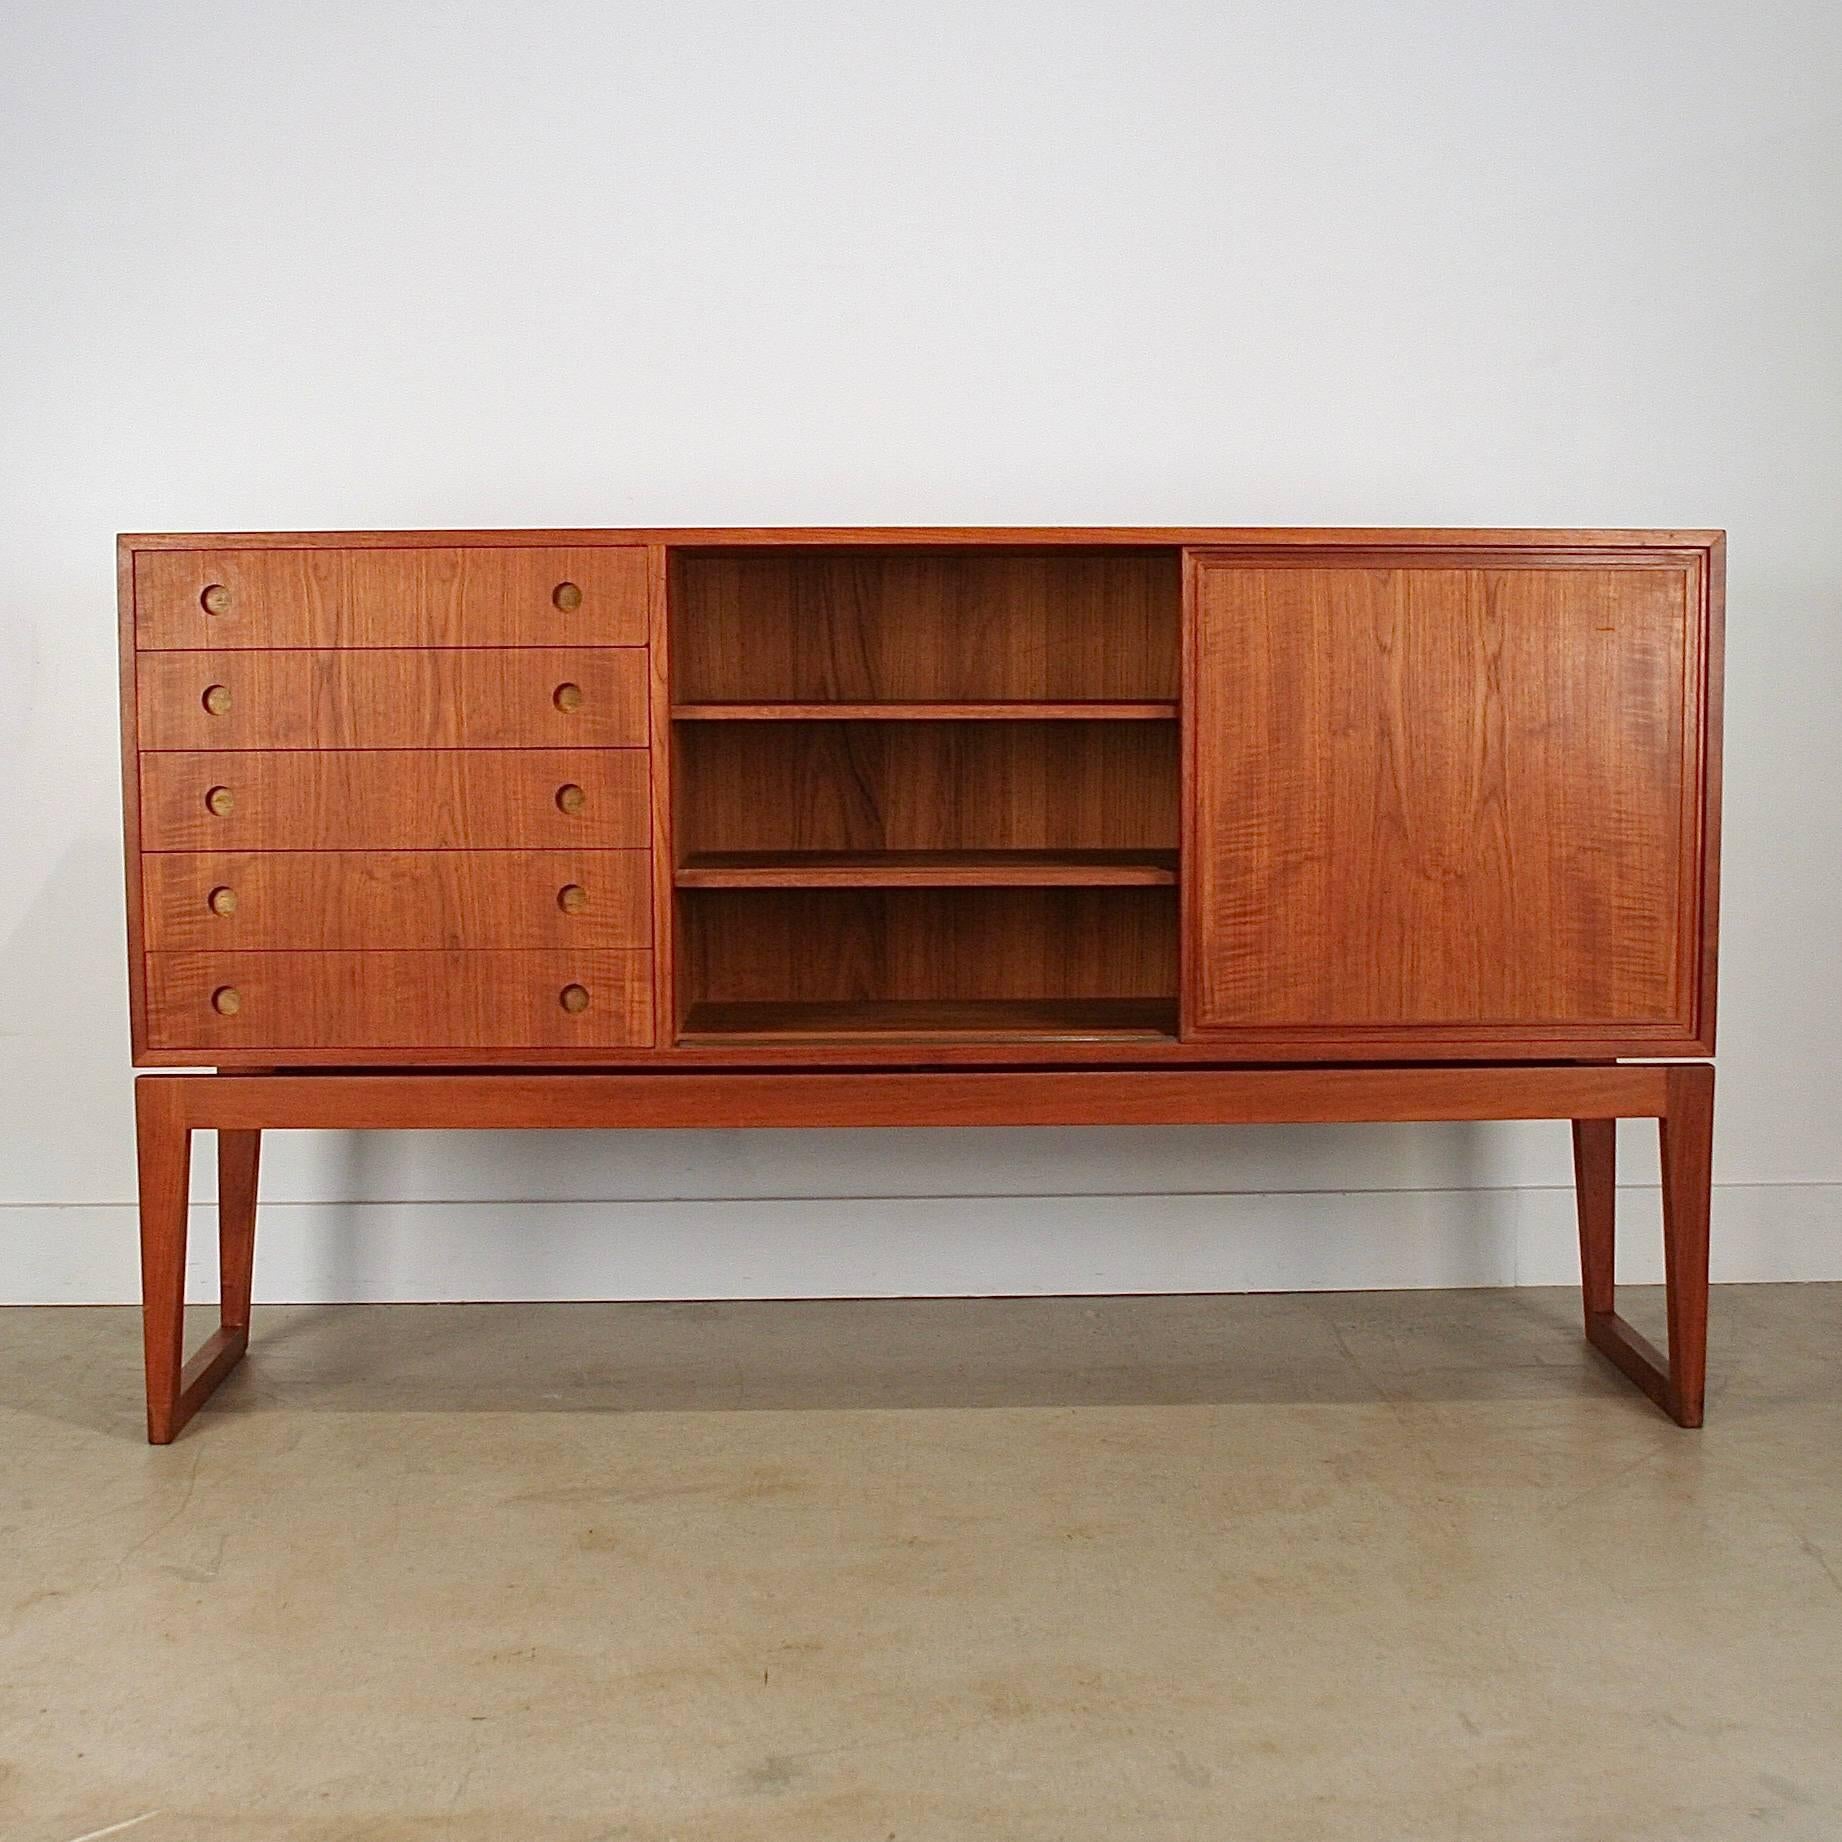 Vintage Danish teak sideboard In Excellent Condition For Sale In Vancouver, BC